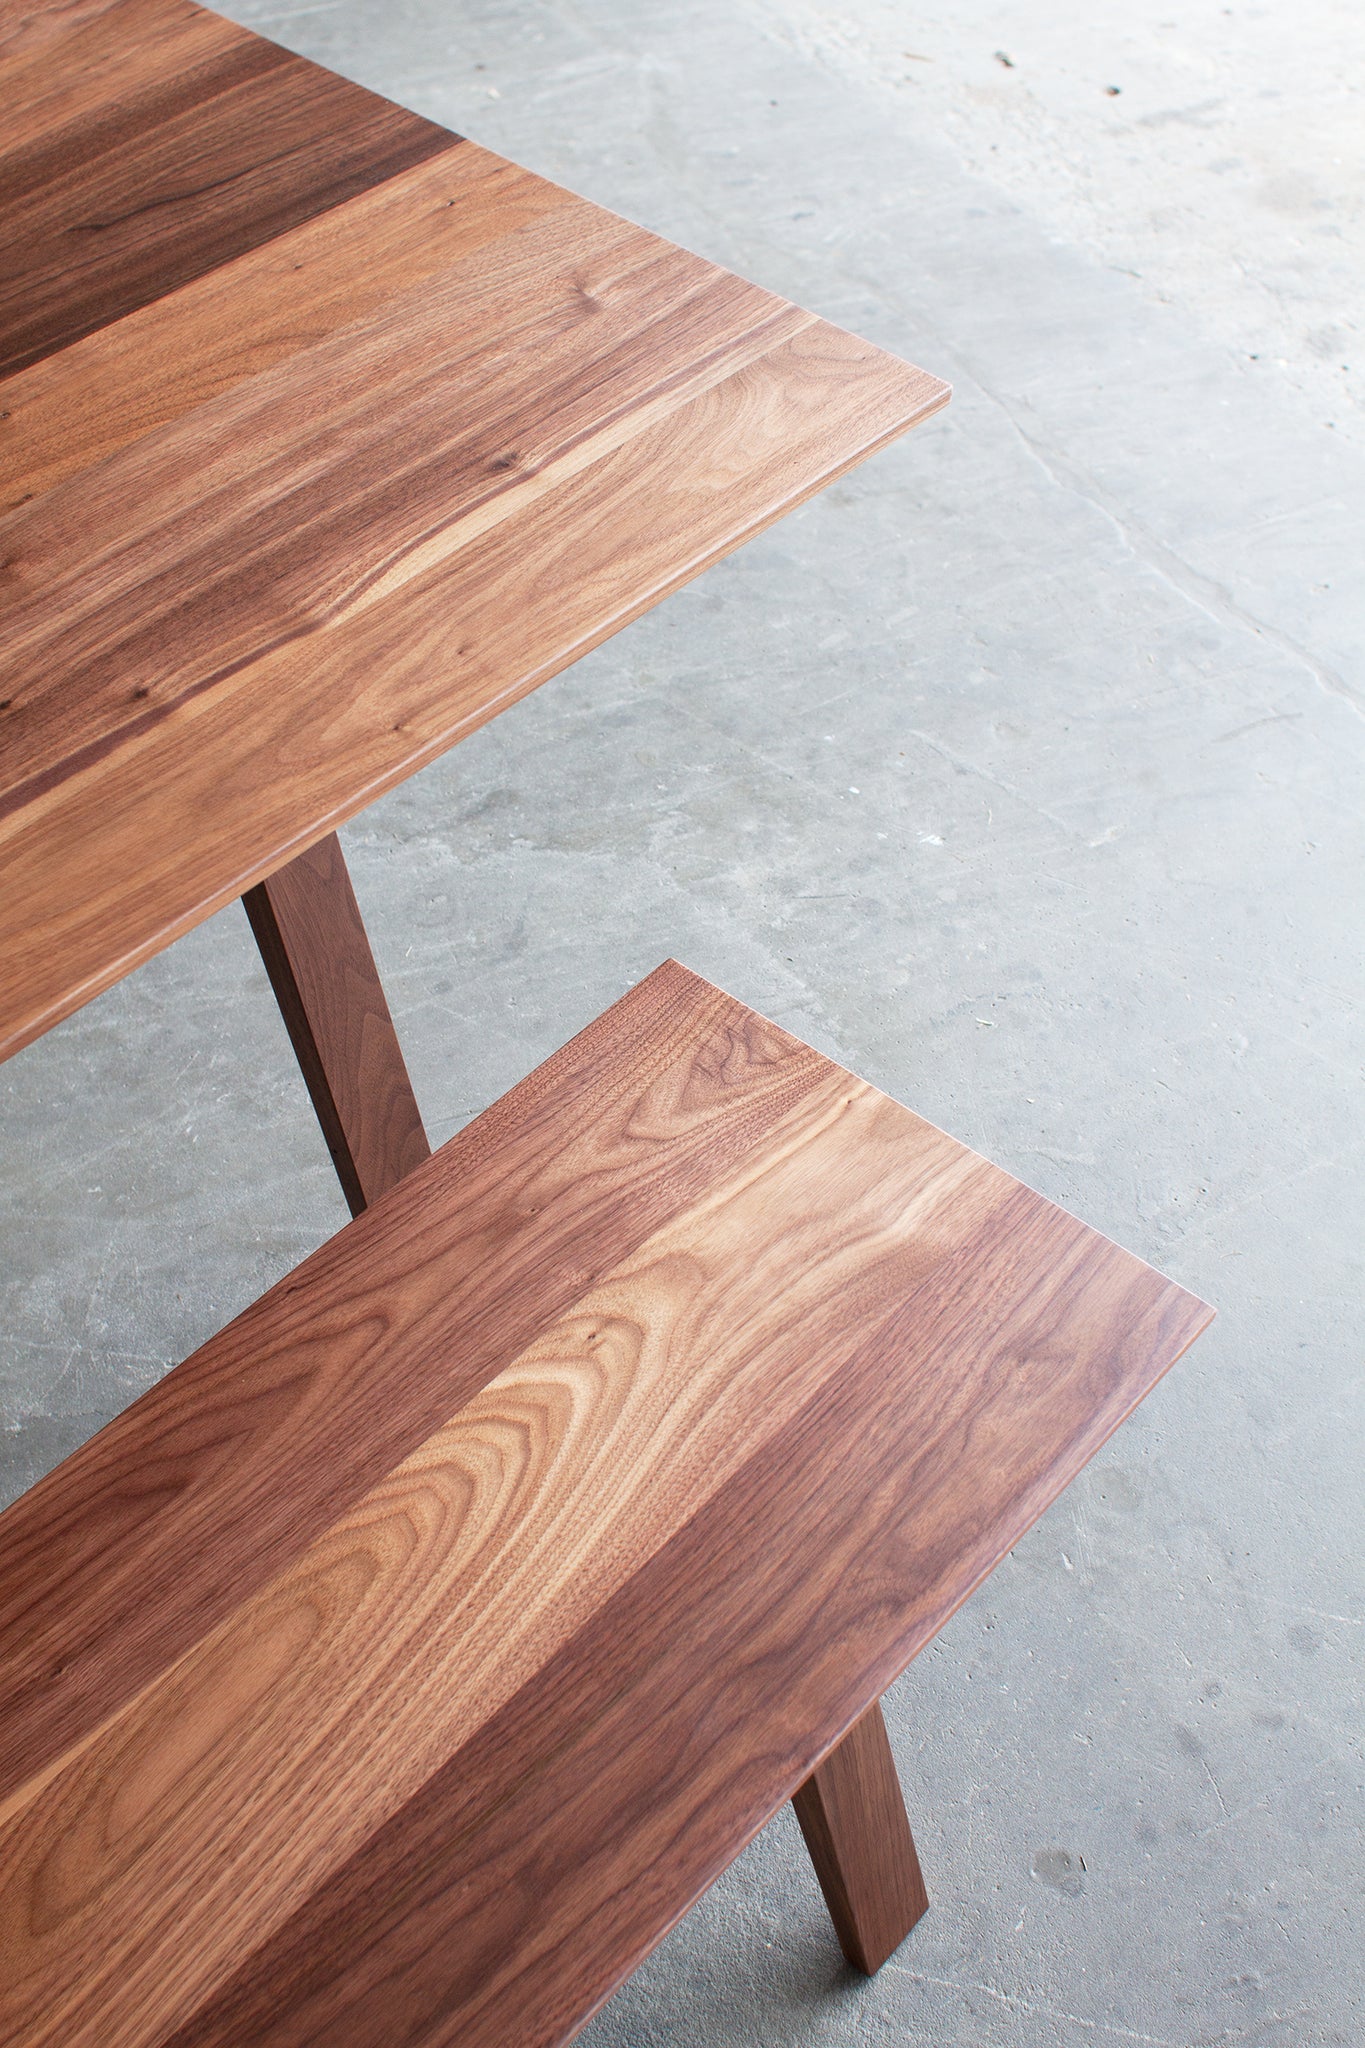 Louis table and Bench by Mast Furniture